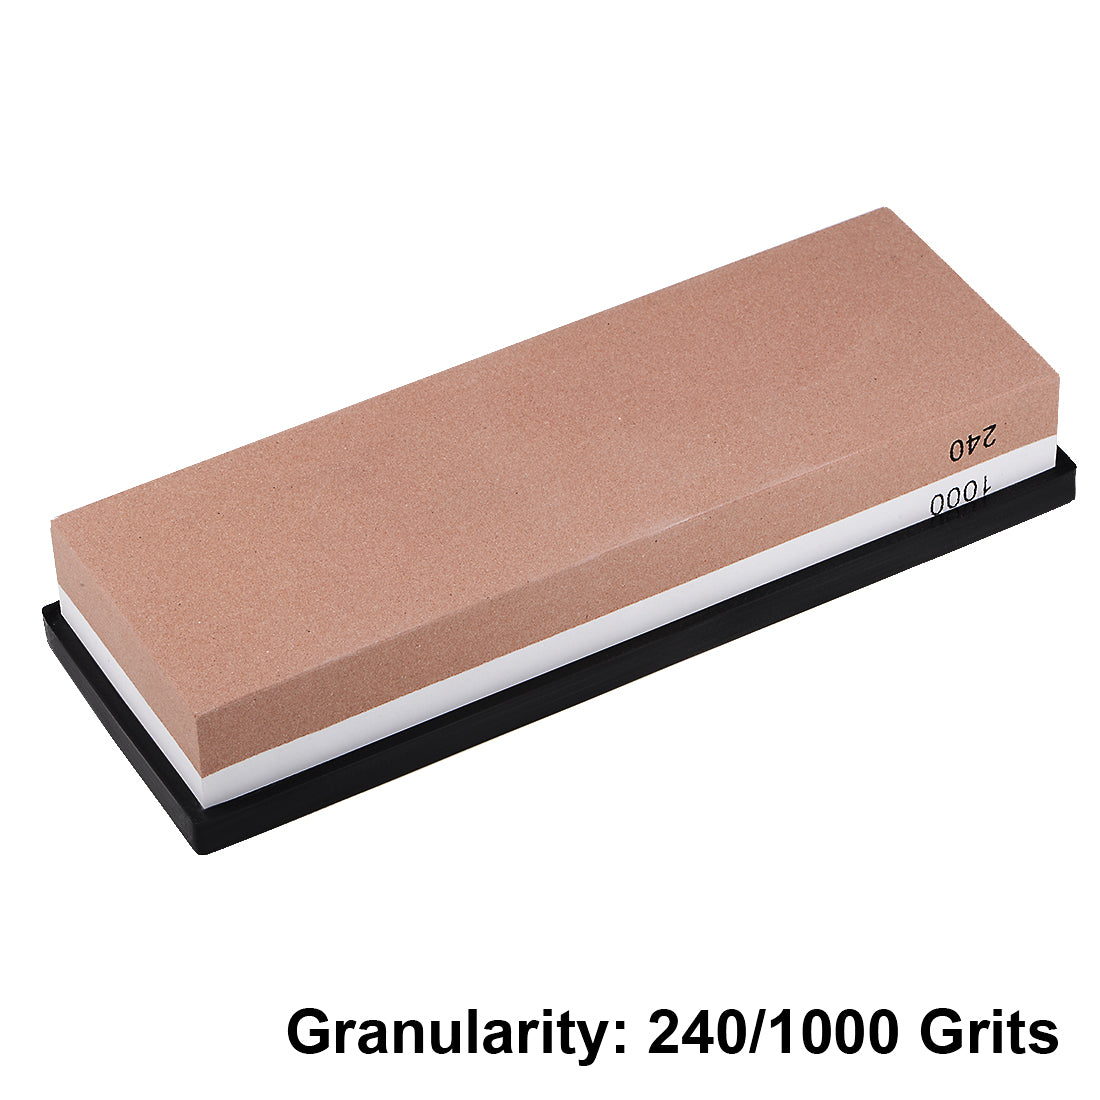 uxcell Uxcell Double-Sided Whetstone Knives Sharpener Sharpening Stone 240/1000 Grit for Scissors Razors Carving Tool